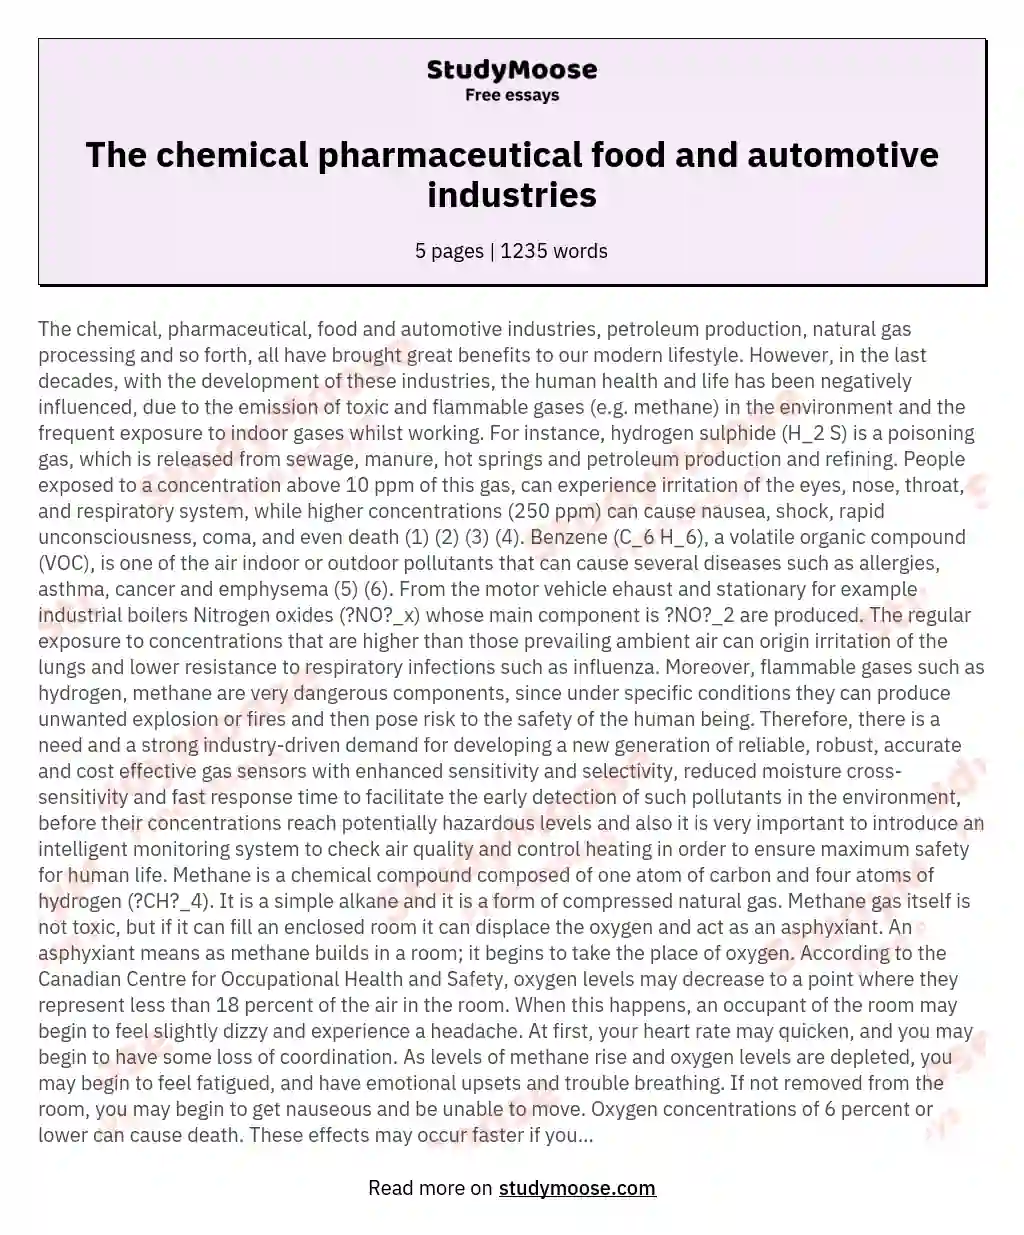 The chemical pharmaceutical food and automotive industries